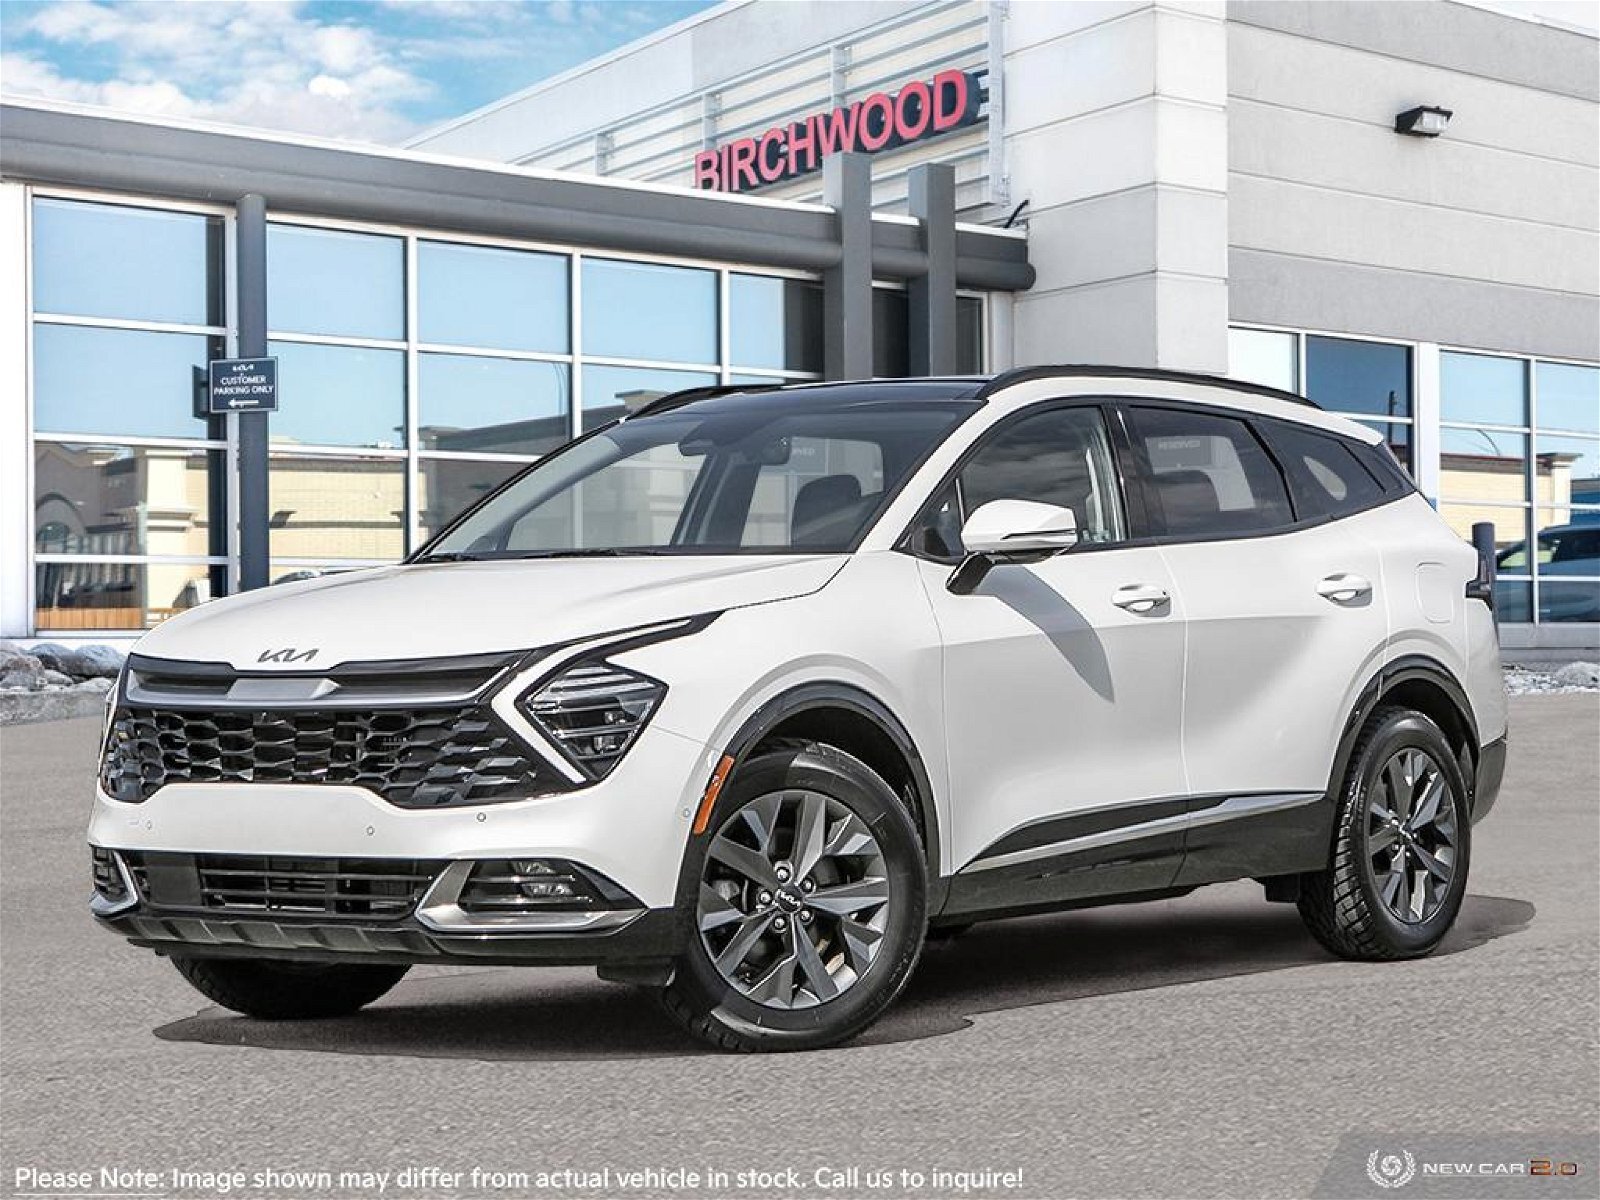 2024 Kia Sportage HEV SX up to $9,000 in savings available on EV vehicle